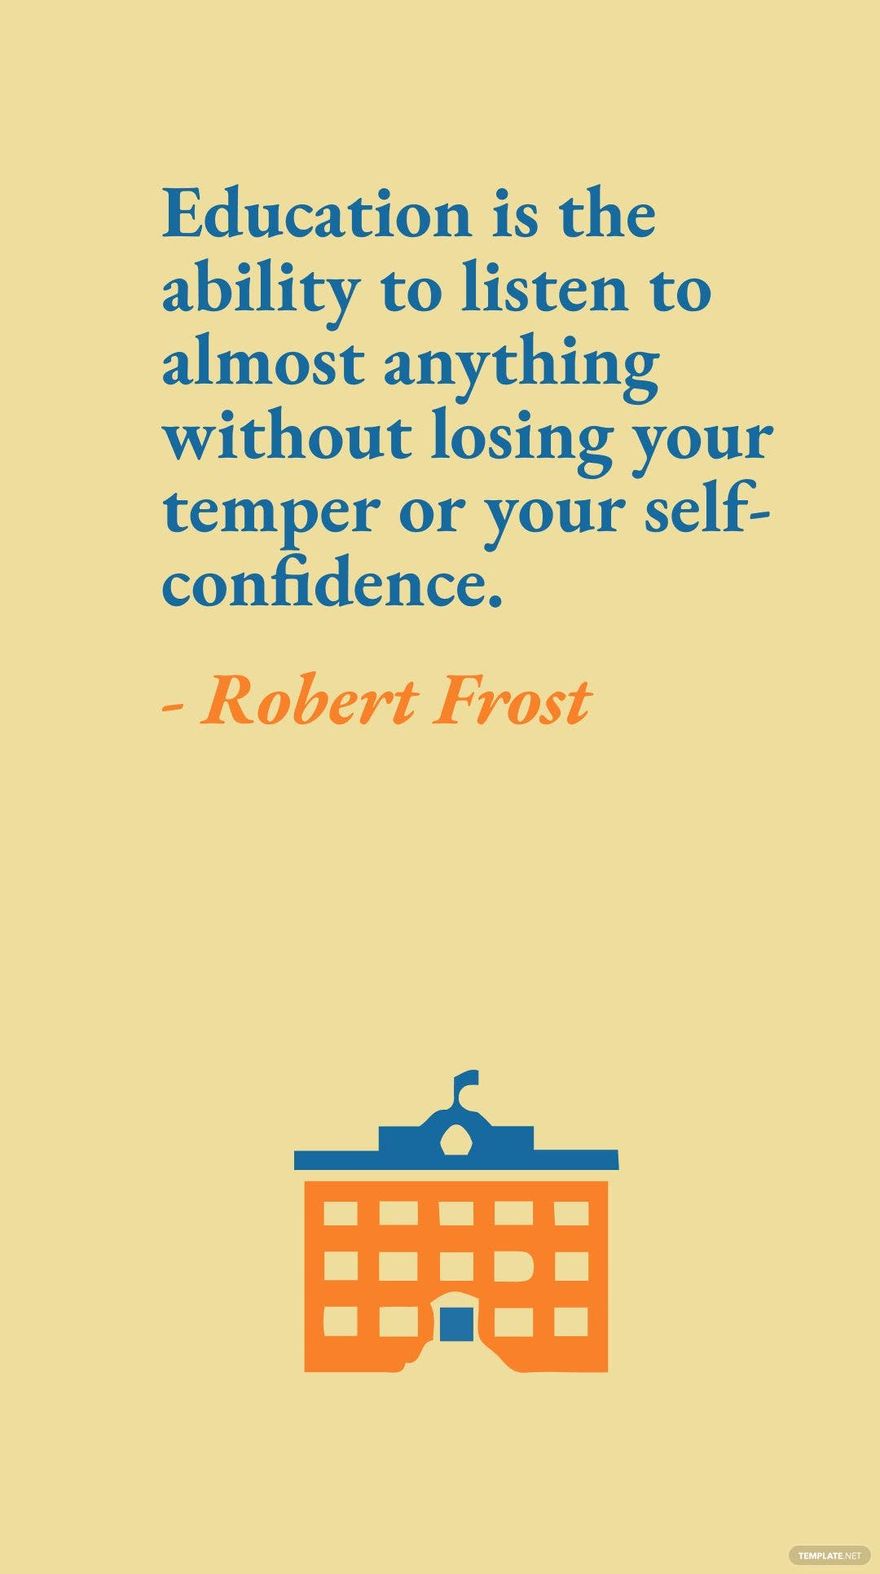 Robert Frost - Education is the ability to listen to almost anything without losing your temper or your self-confidence. in JPG